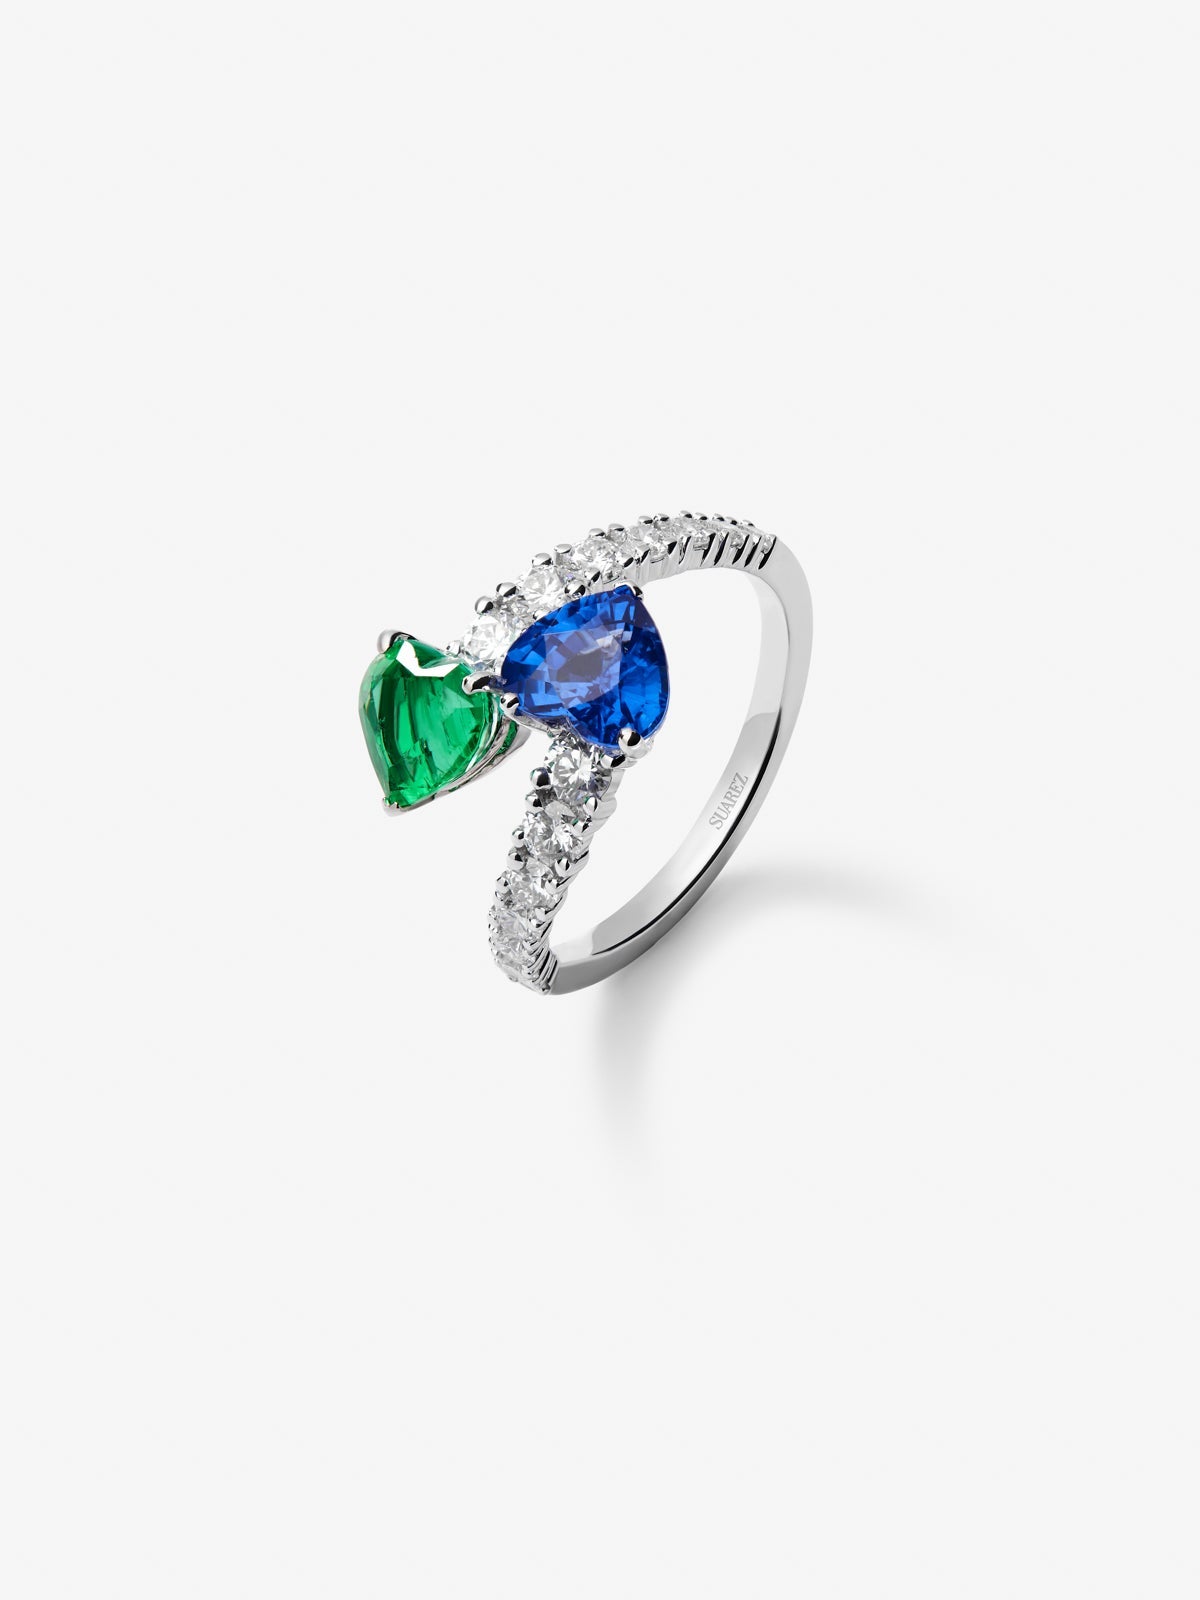 You and me ring in 18K white gold with intense blue pear-cut sapphire of 1.93 cts, pear-cut green emerald of 0.89 cts and 14 brilliant-cut diamonds with a total of 0.89 cts